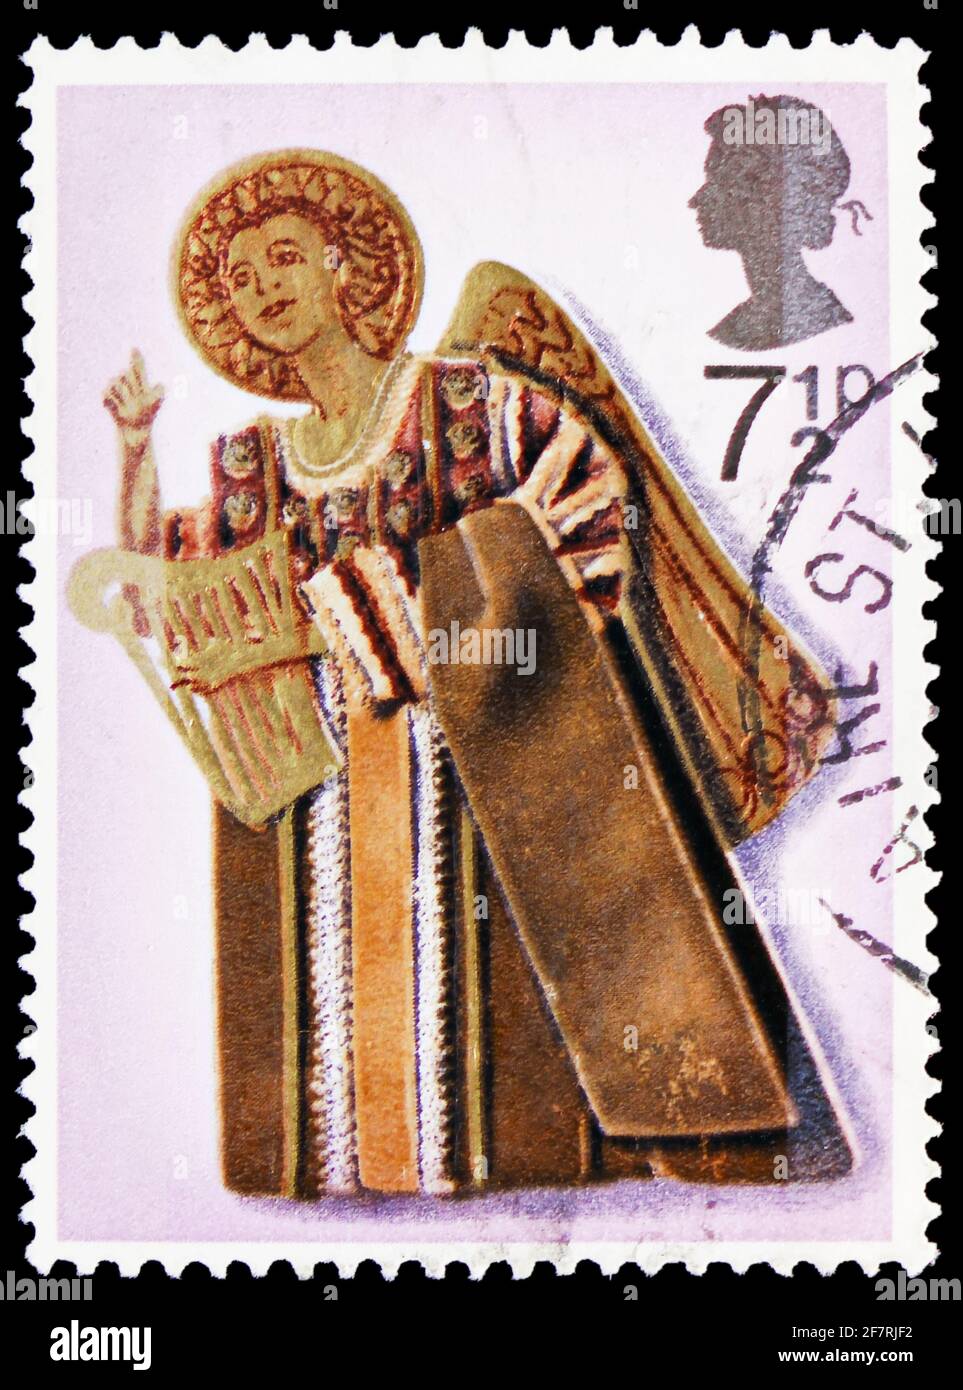 MOSCOW, RUSSIA - JANUARY 17, 2021: Postage stamp printed in United Kingdom shows Angel playing Harp, Christmas serie, circa 1972 Stock Photo